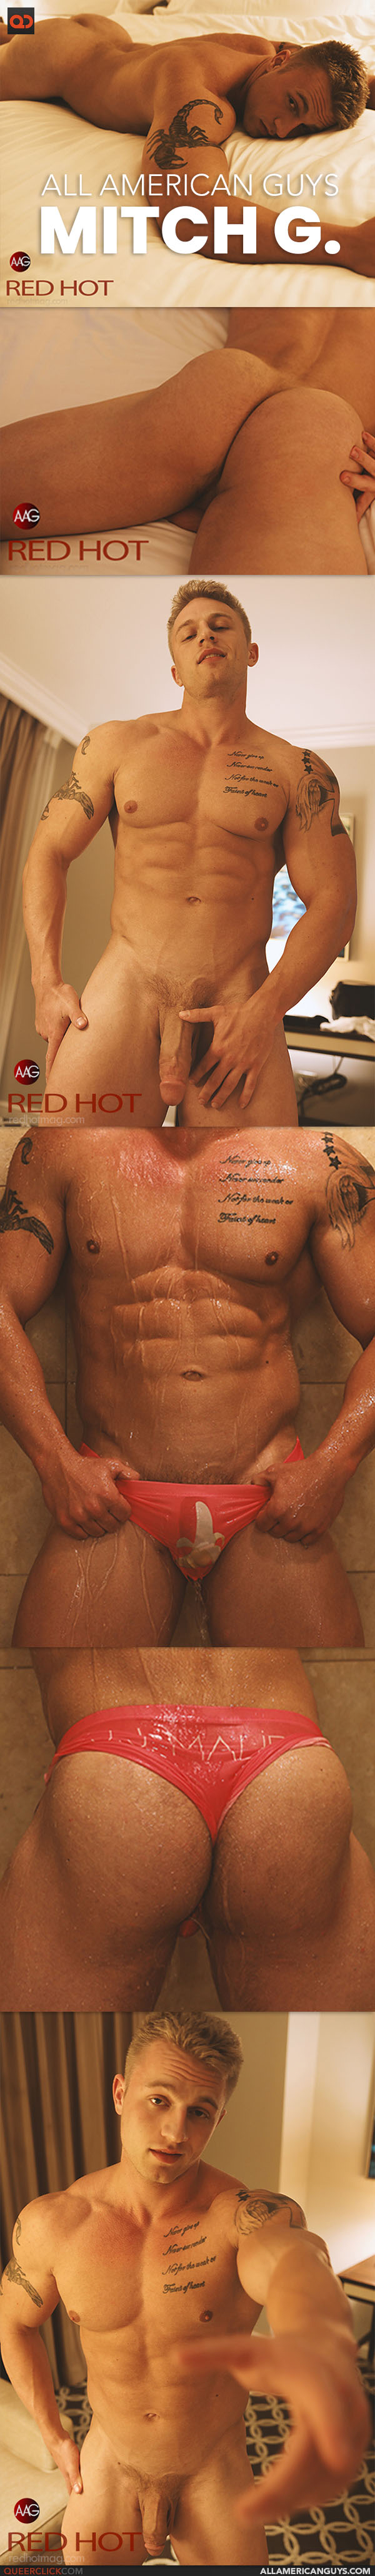 All American Guys: Mitch G. - Red Hot Mag